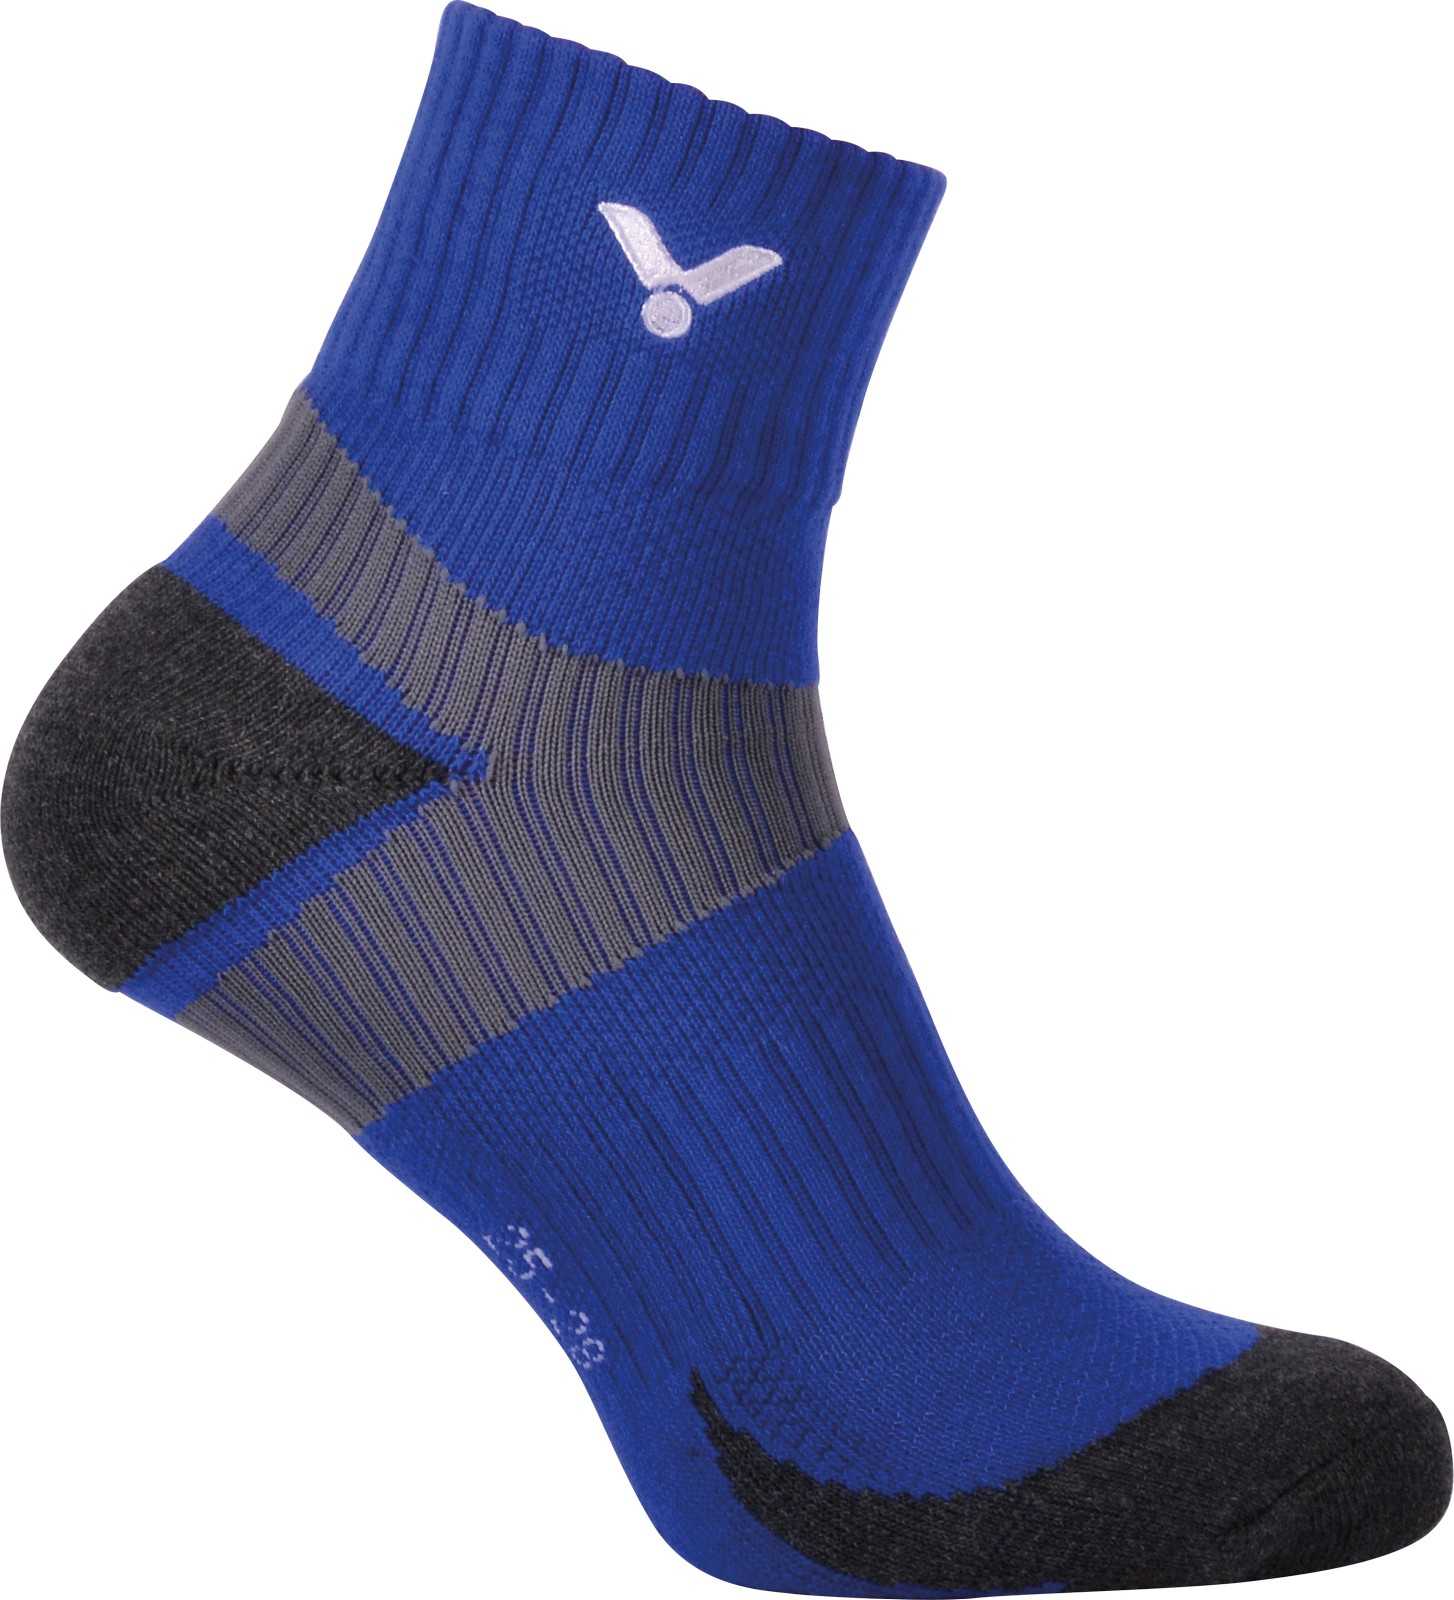 CHAUSSETTES VICTOR SK 139 BLUE